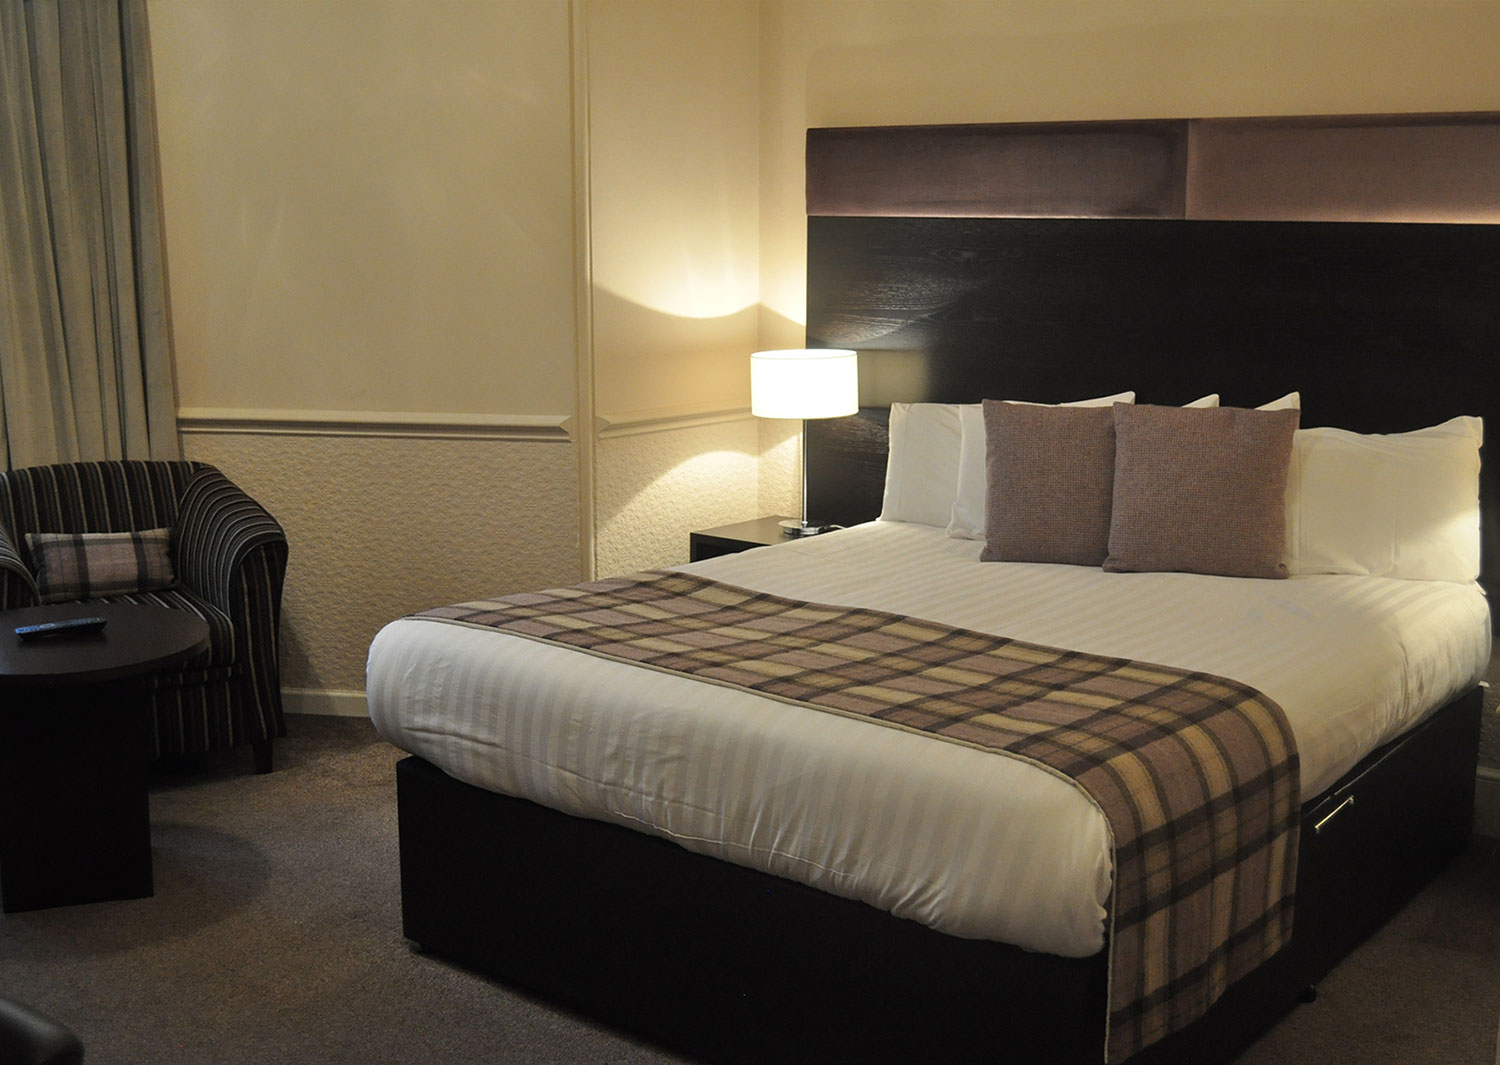 Pitlochry Town Centre Accommodation